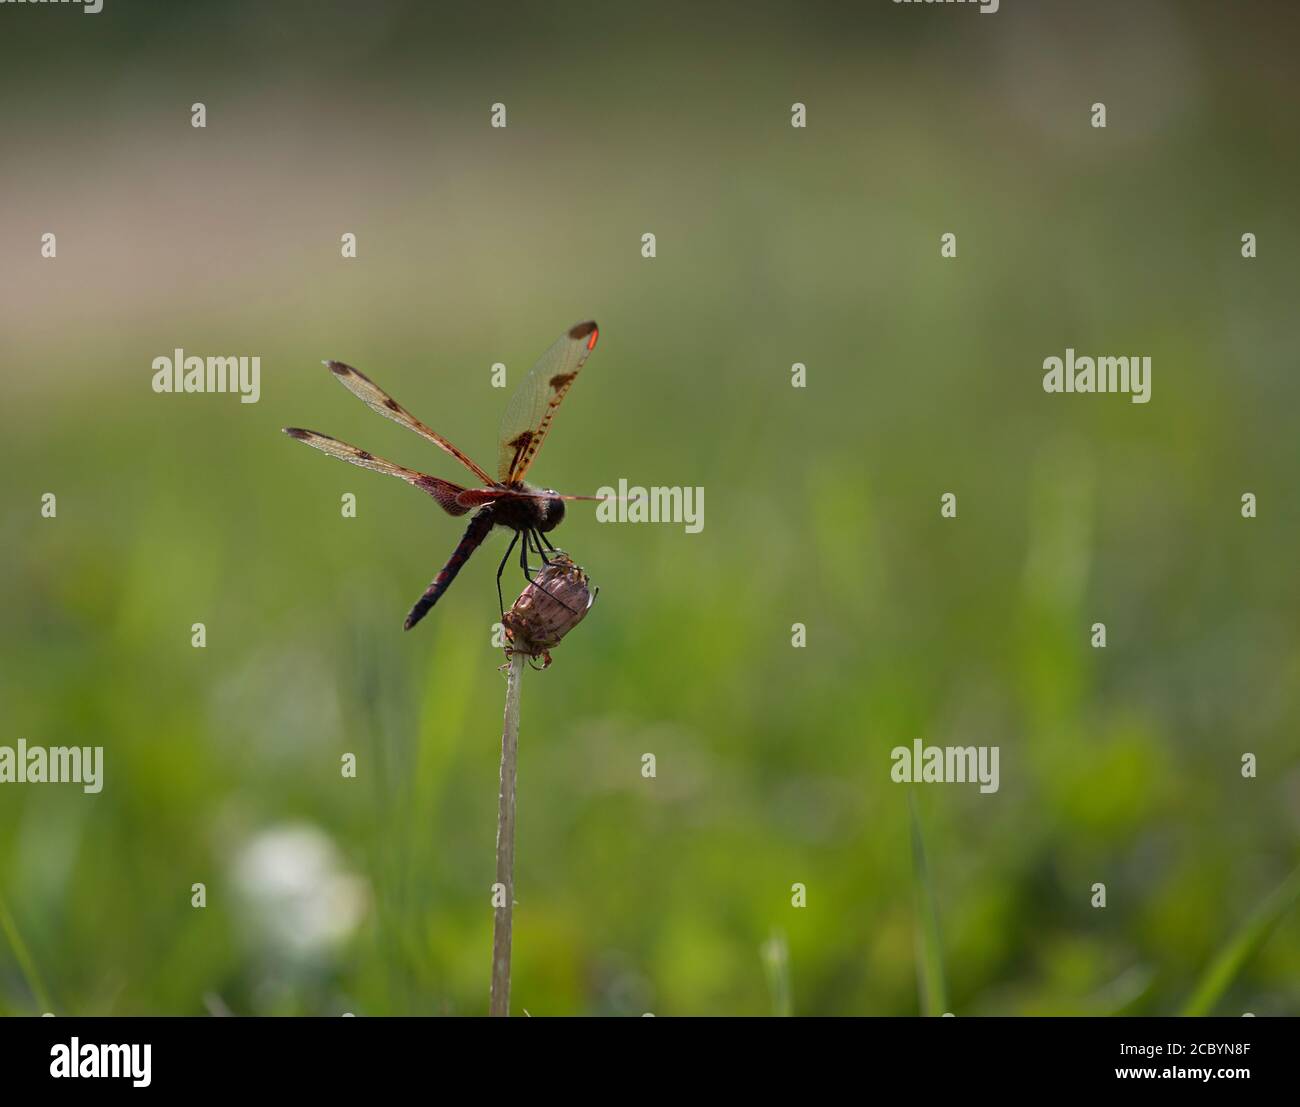 A Calico pennant dragonfly on a marsh plant with blurred green nature background Stock Photo